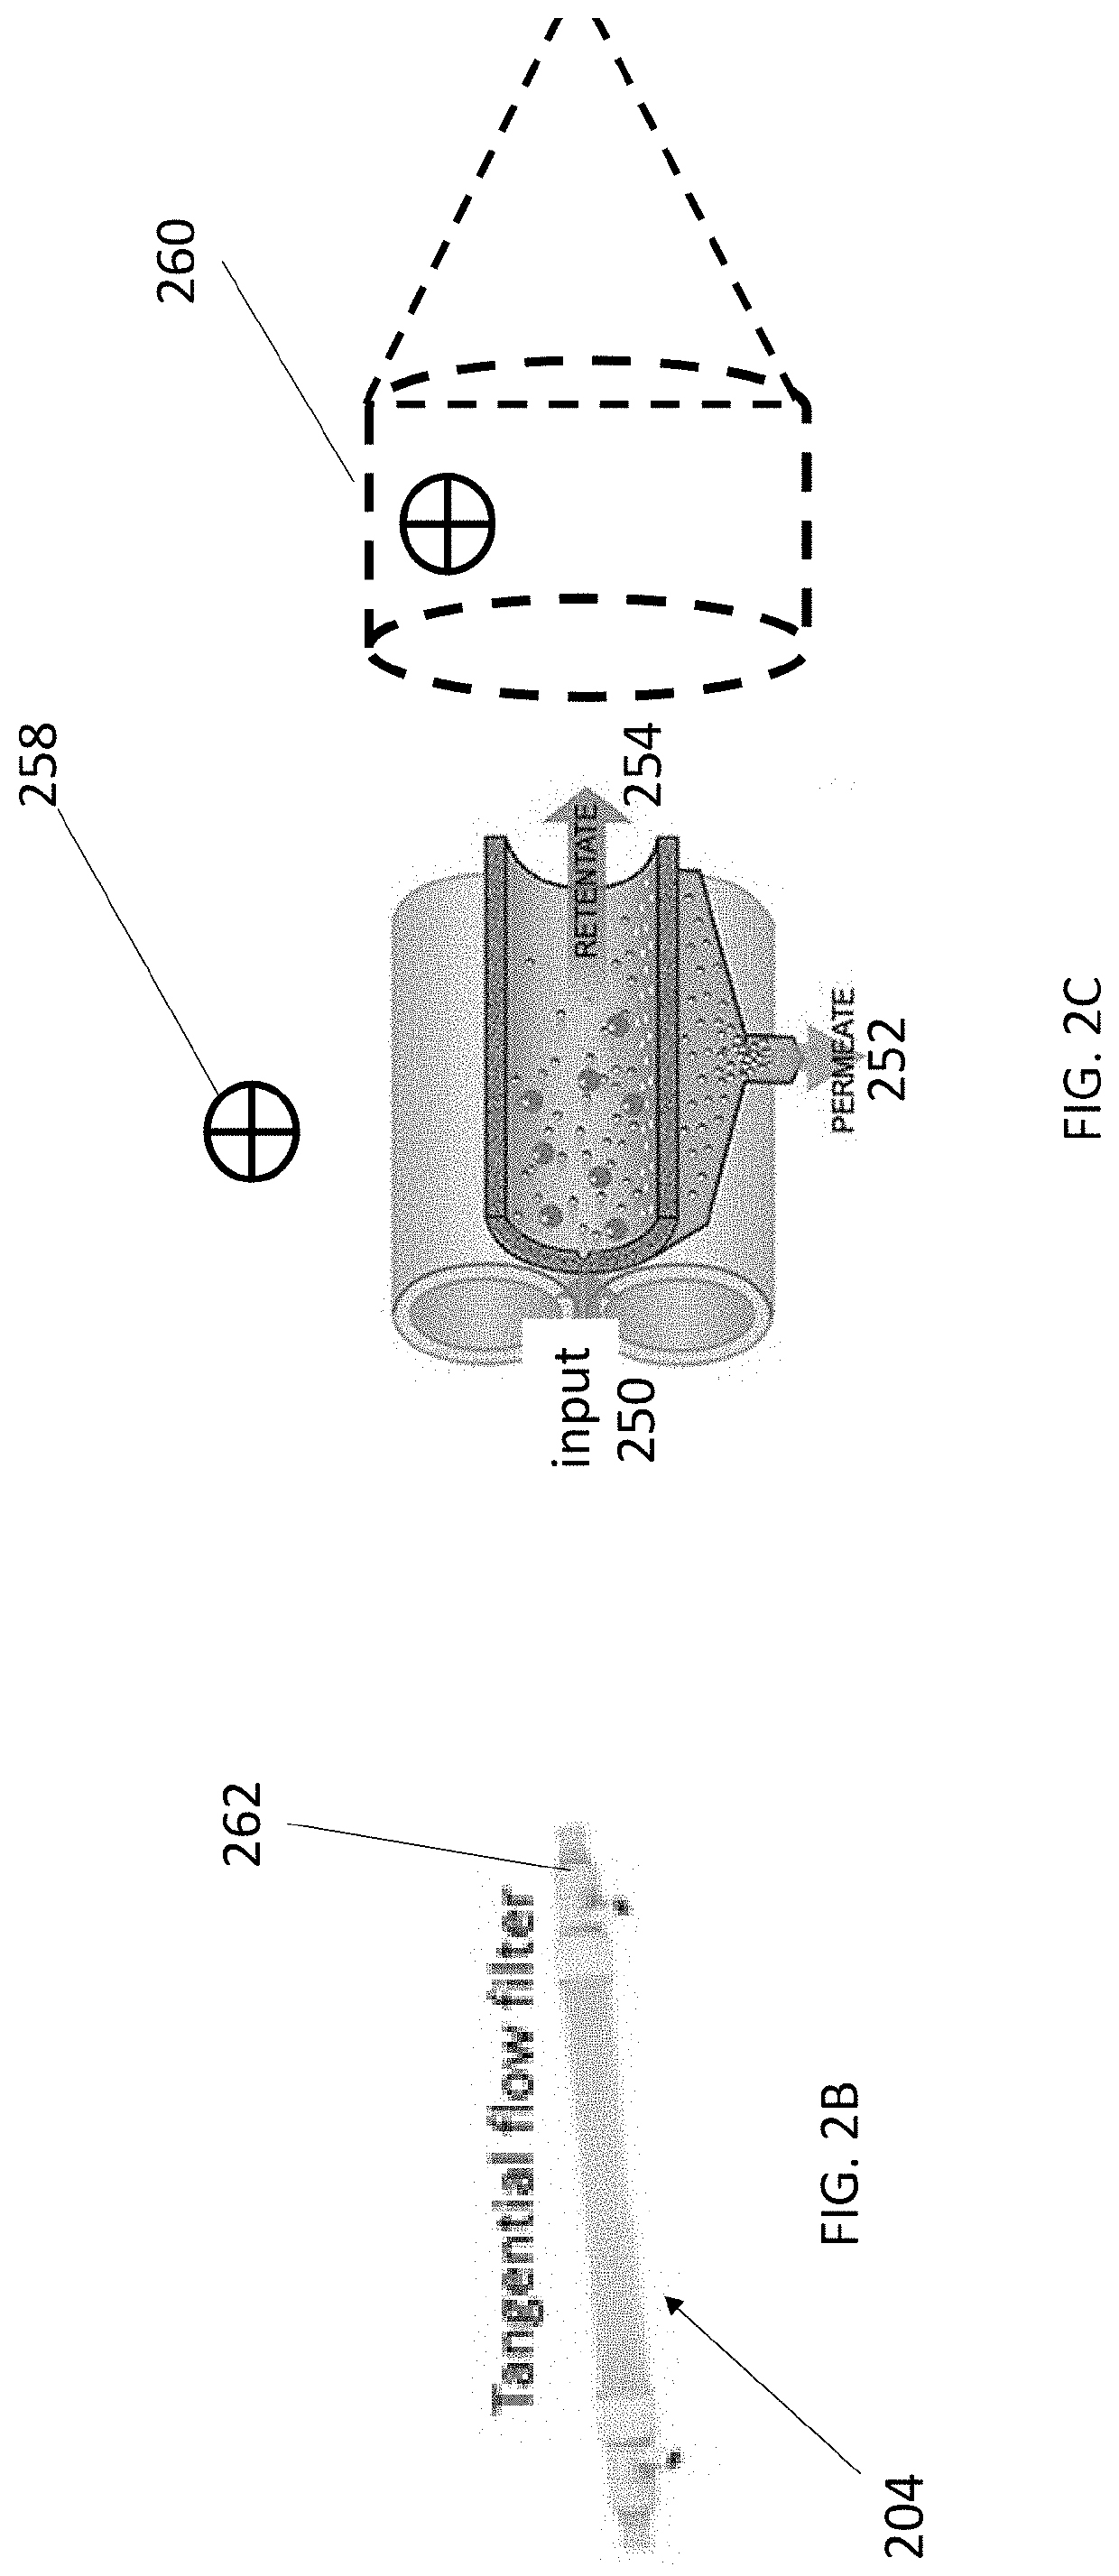 Cell concentration methods and devices for use in automated bioreactors